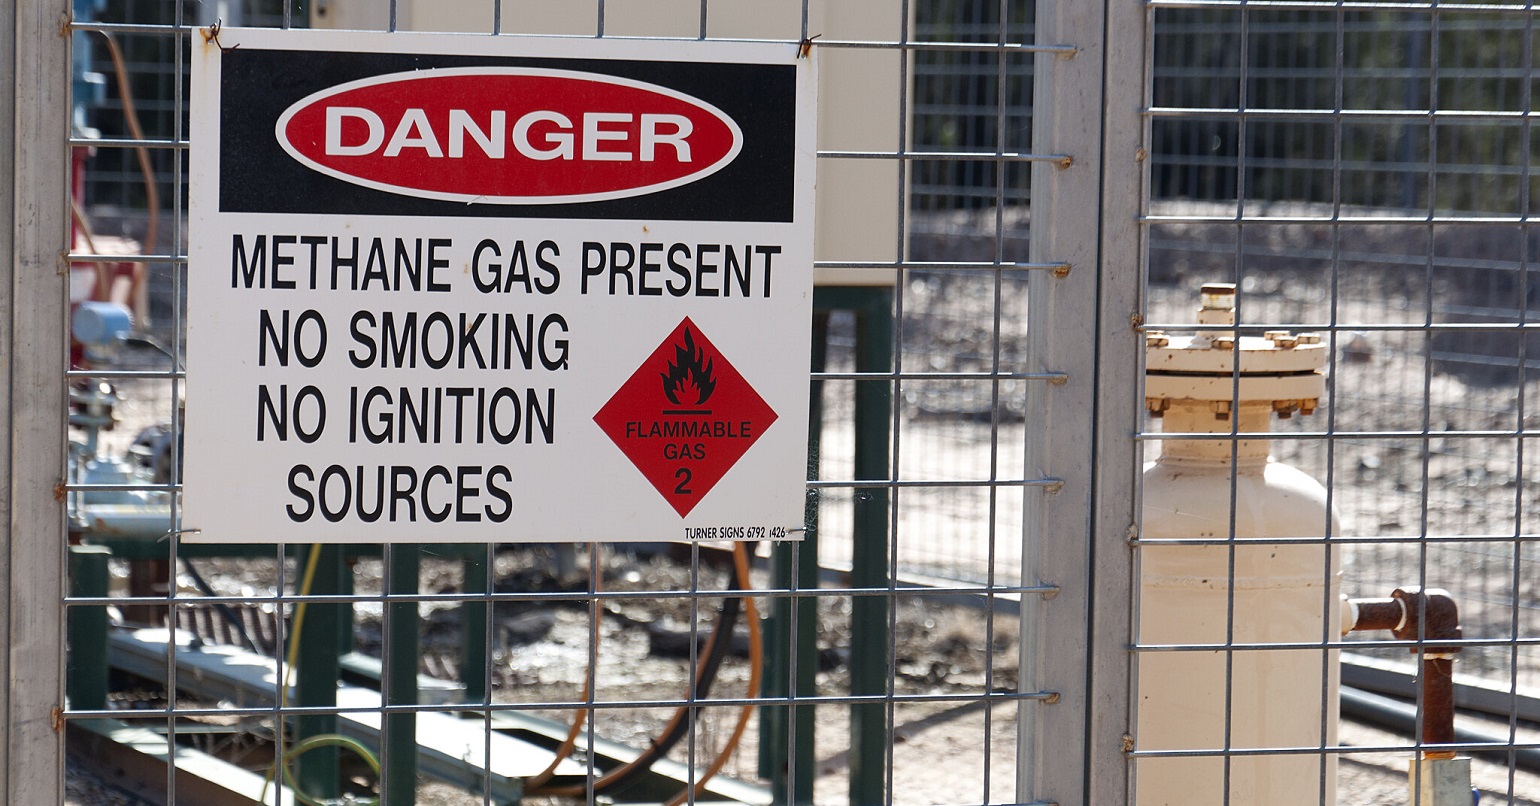 A sign reading "Danger - methane gas present'